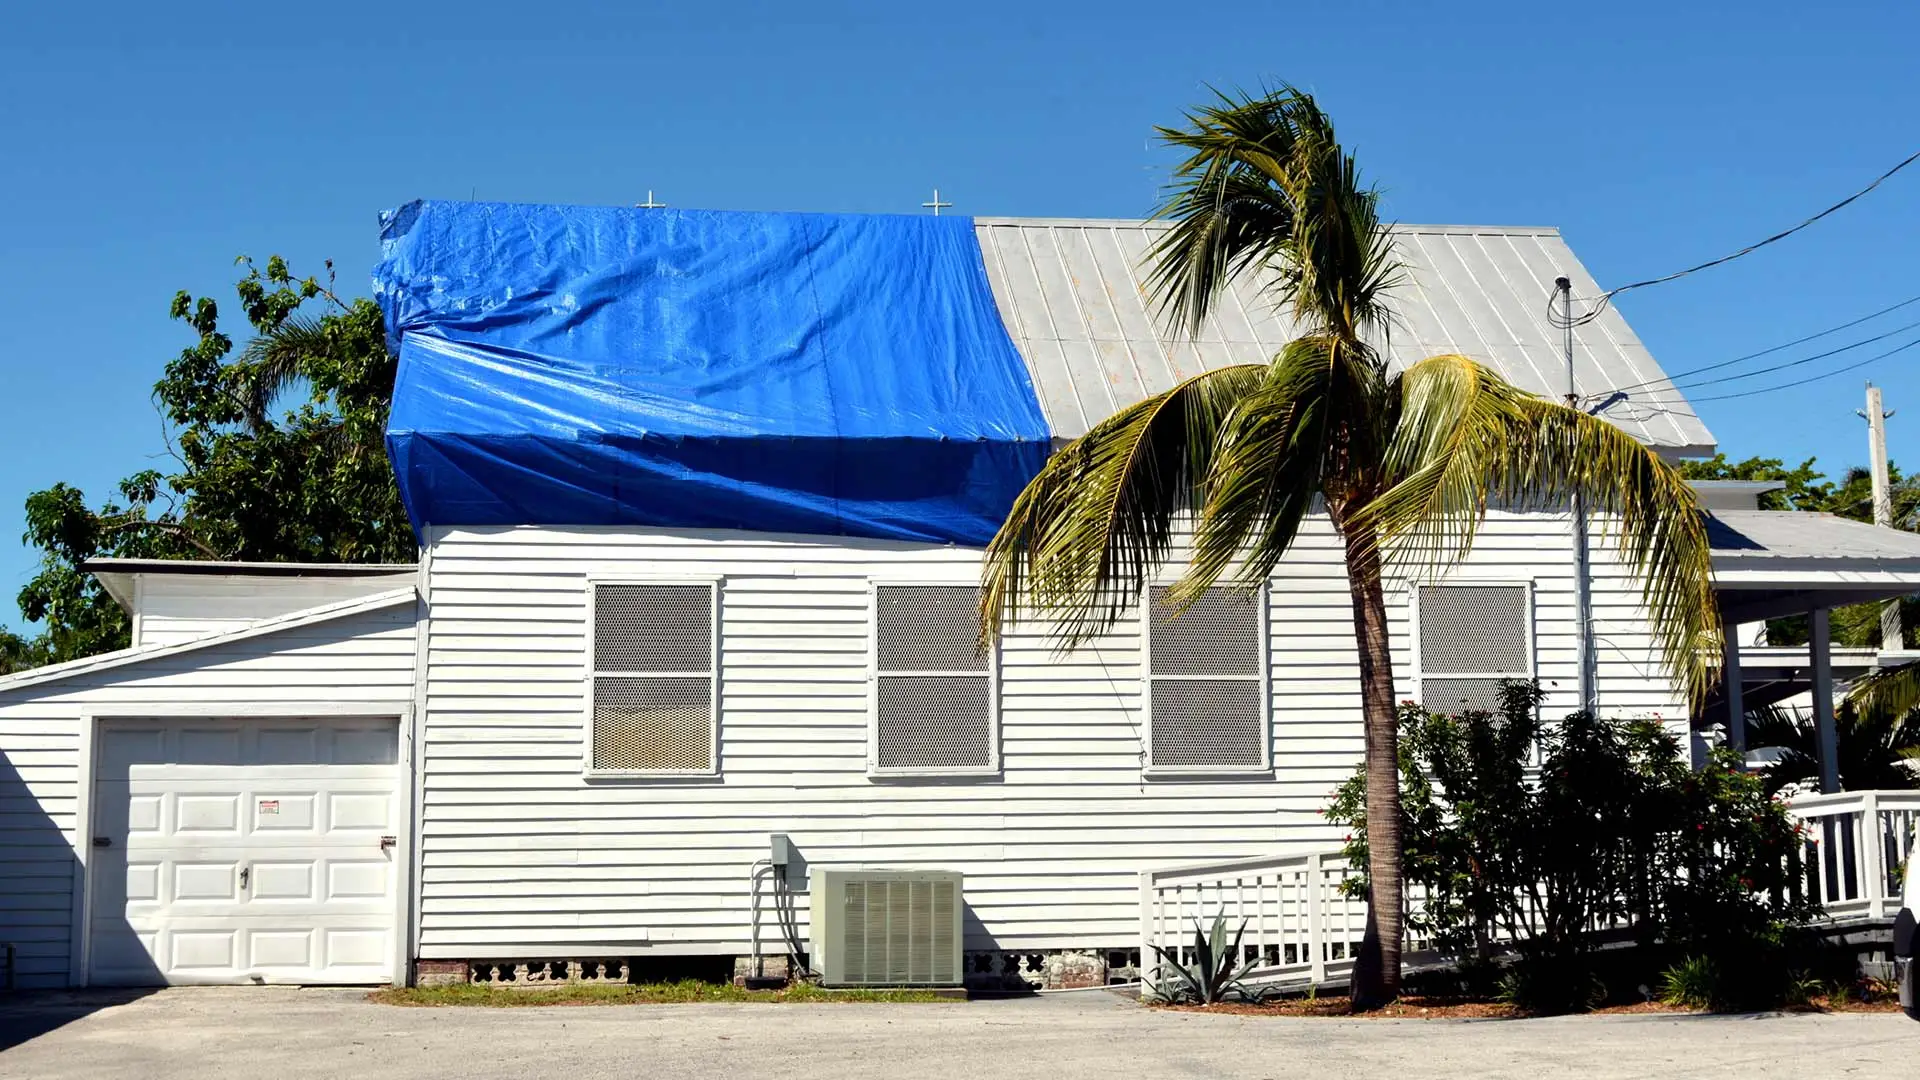 A home in Lakeland, FL with a tarp covering roof damage.